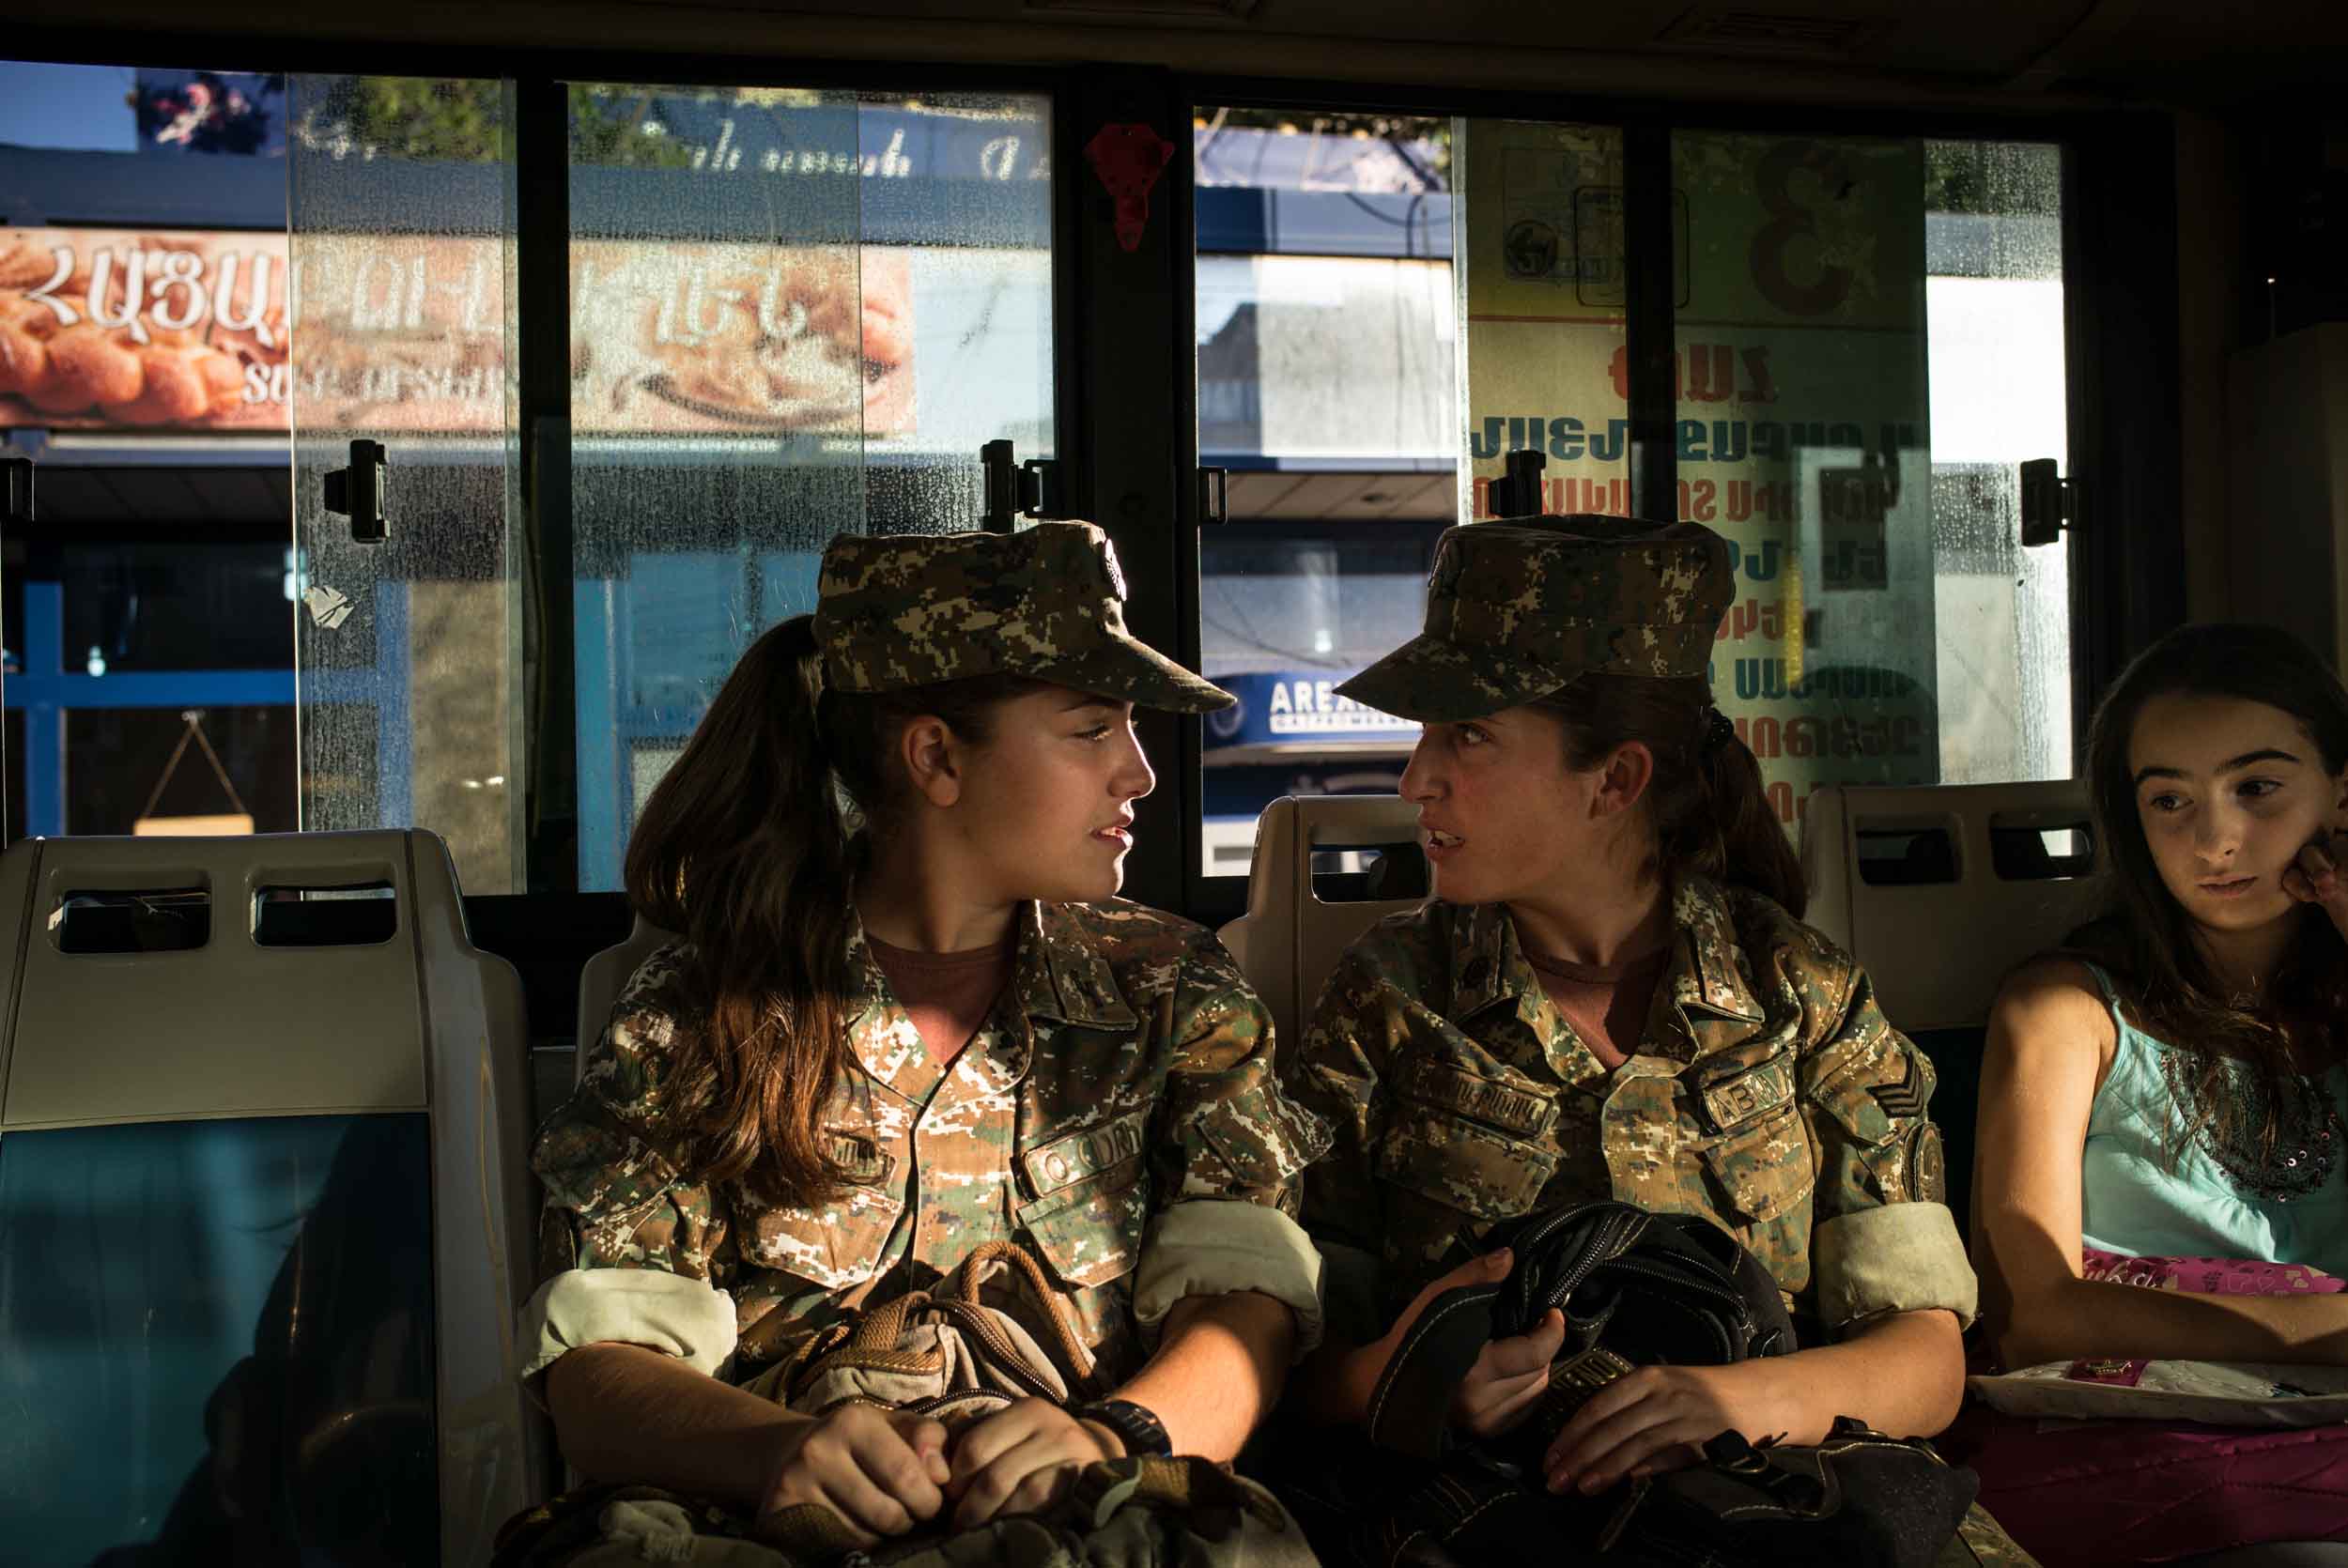  Girls on their way home to their dormitory at the Military High School in Yerevan. "I notice that still many people talk about us, but I don´t care", says one of the students. 